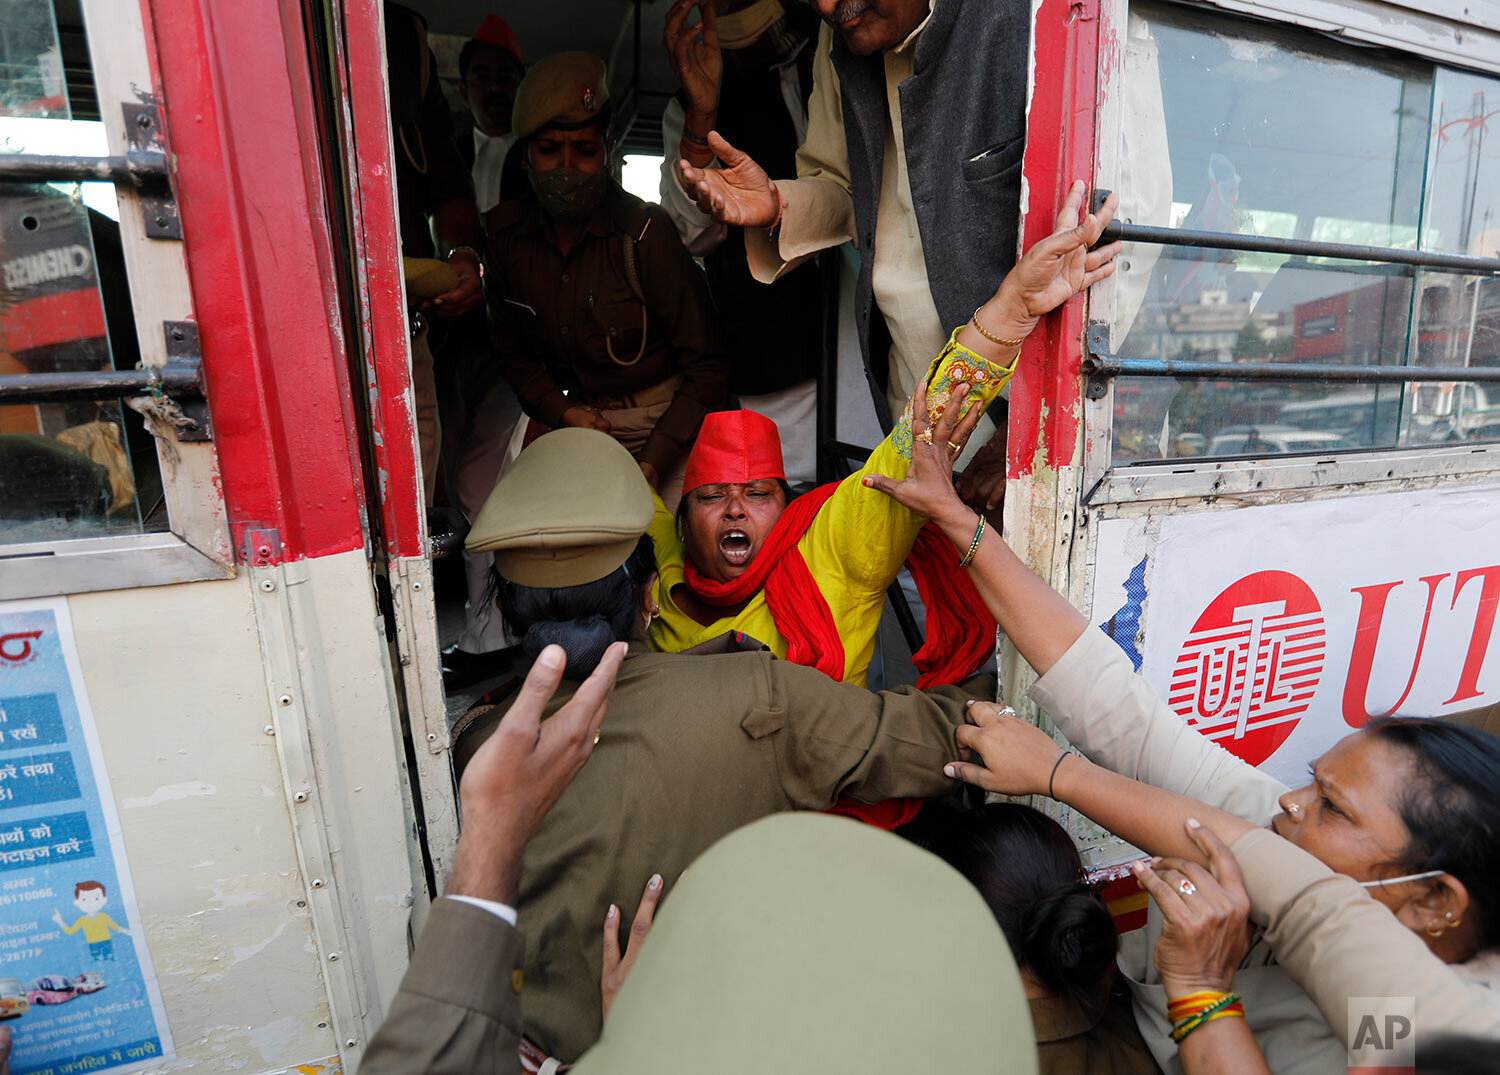  A Samajwadi Party supporter shouts slogans as she is detained by police for trying to enforce a nationwide farmers' strike  in Prayagraj, Tuesday, Dec. 8, 2020. (AP Photo/Rajesh Kumar Singh) 